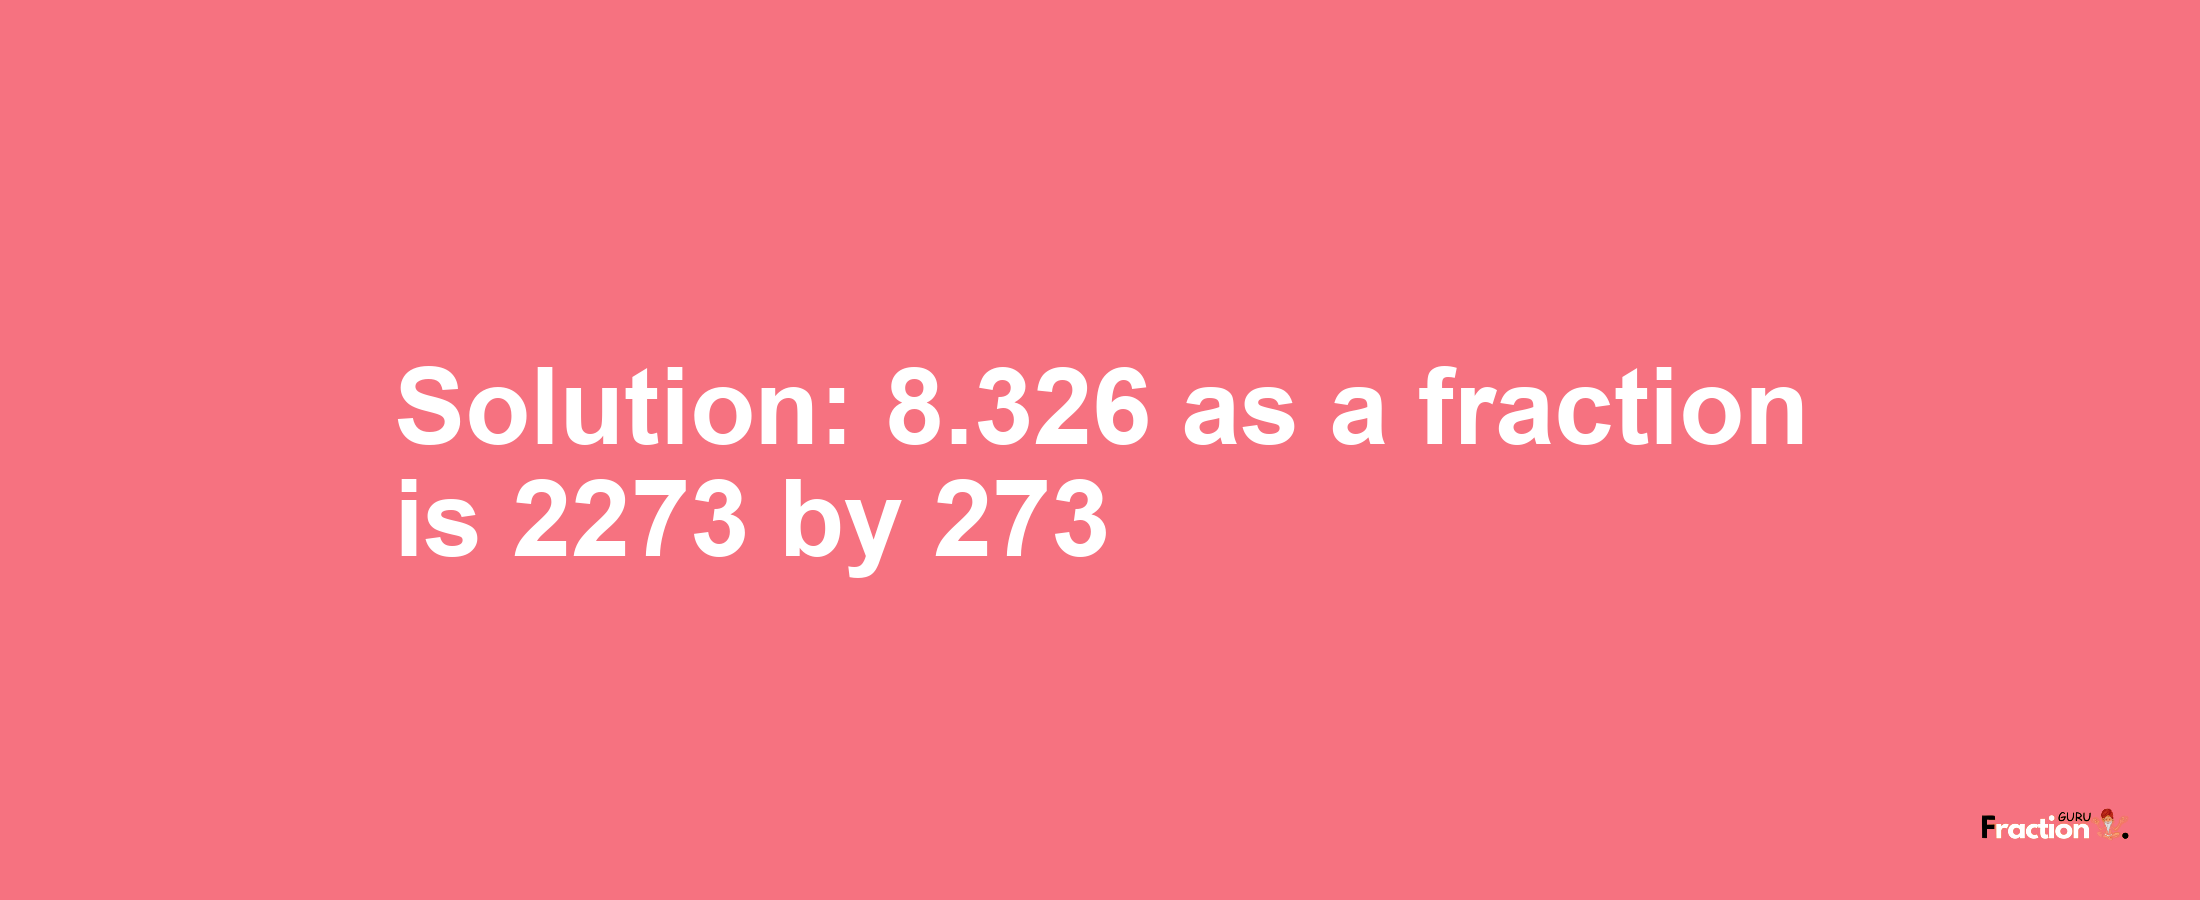 Solution:8.326 as a fraction is 2273/273